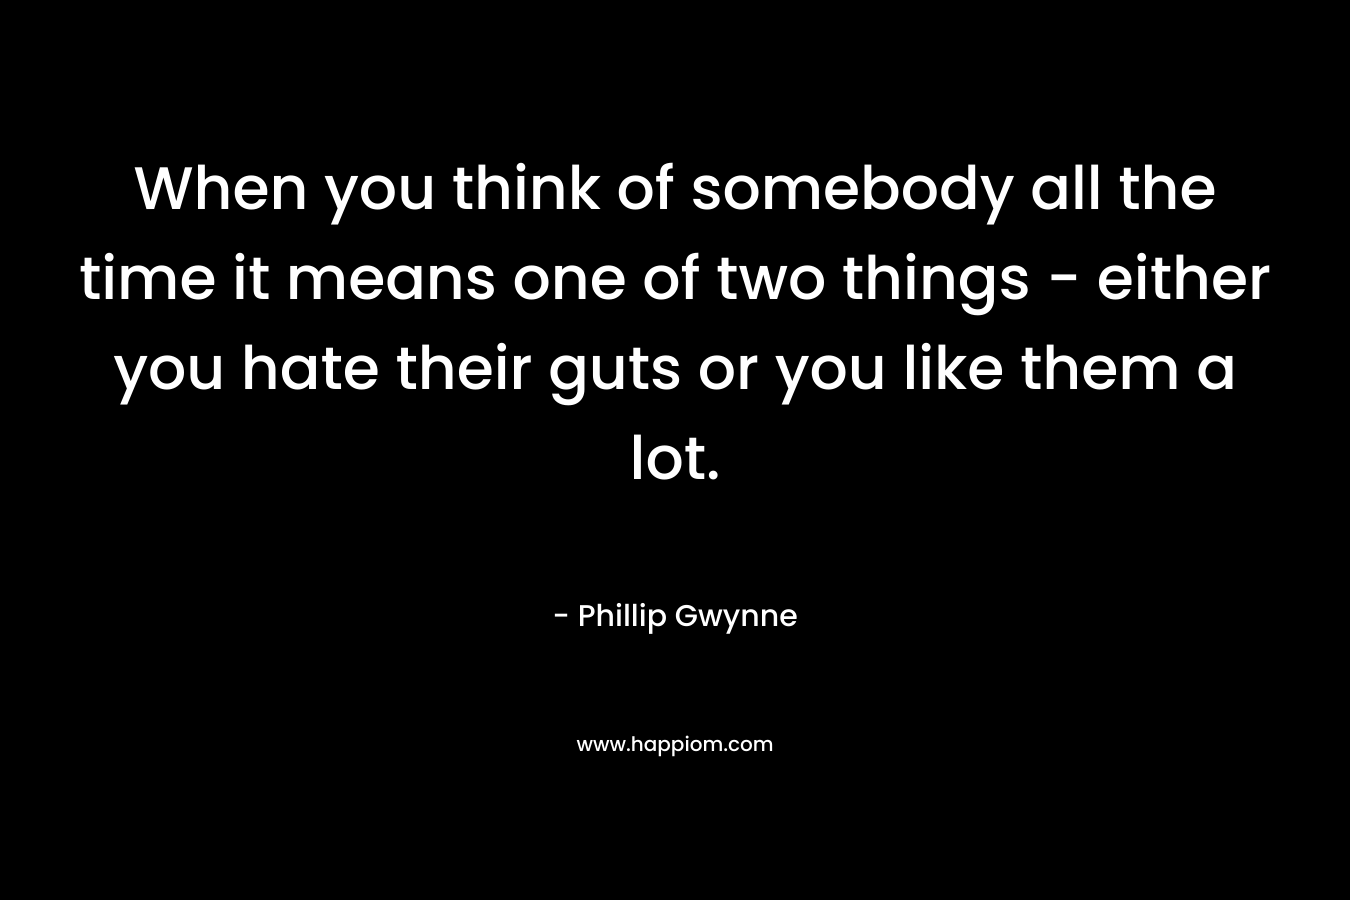 When you think of somebody all the time it means one of two things - either you hate their guts or you like them a lot.